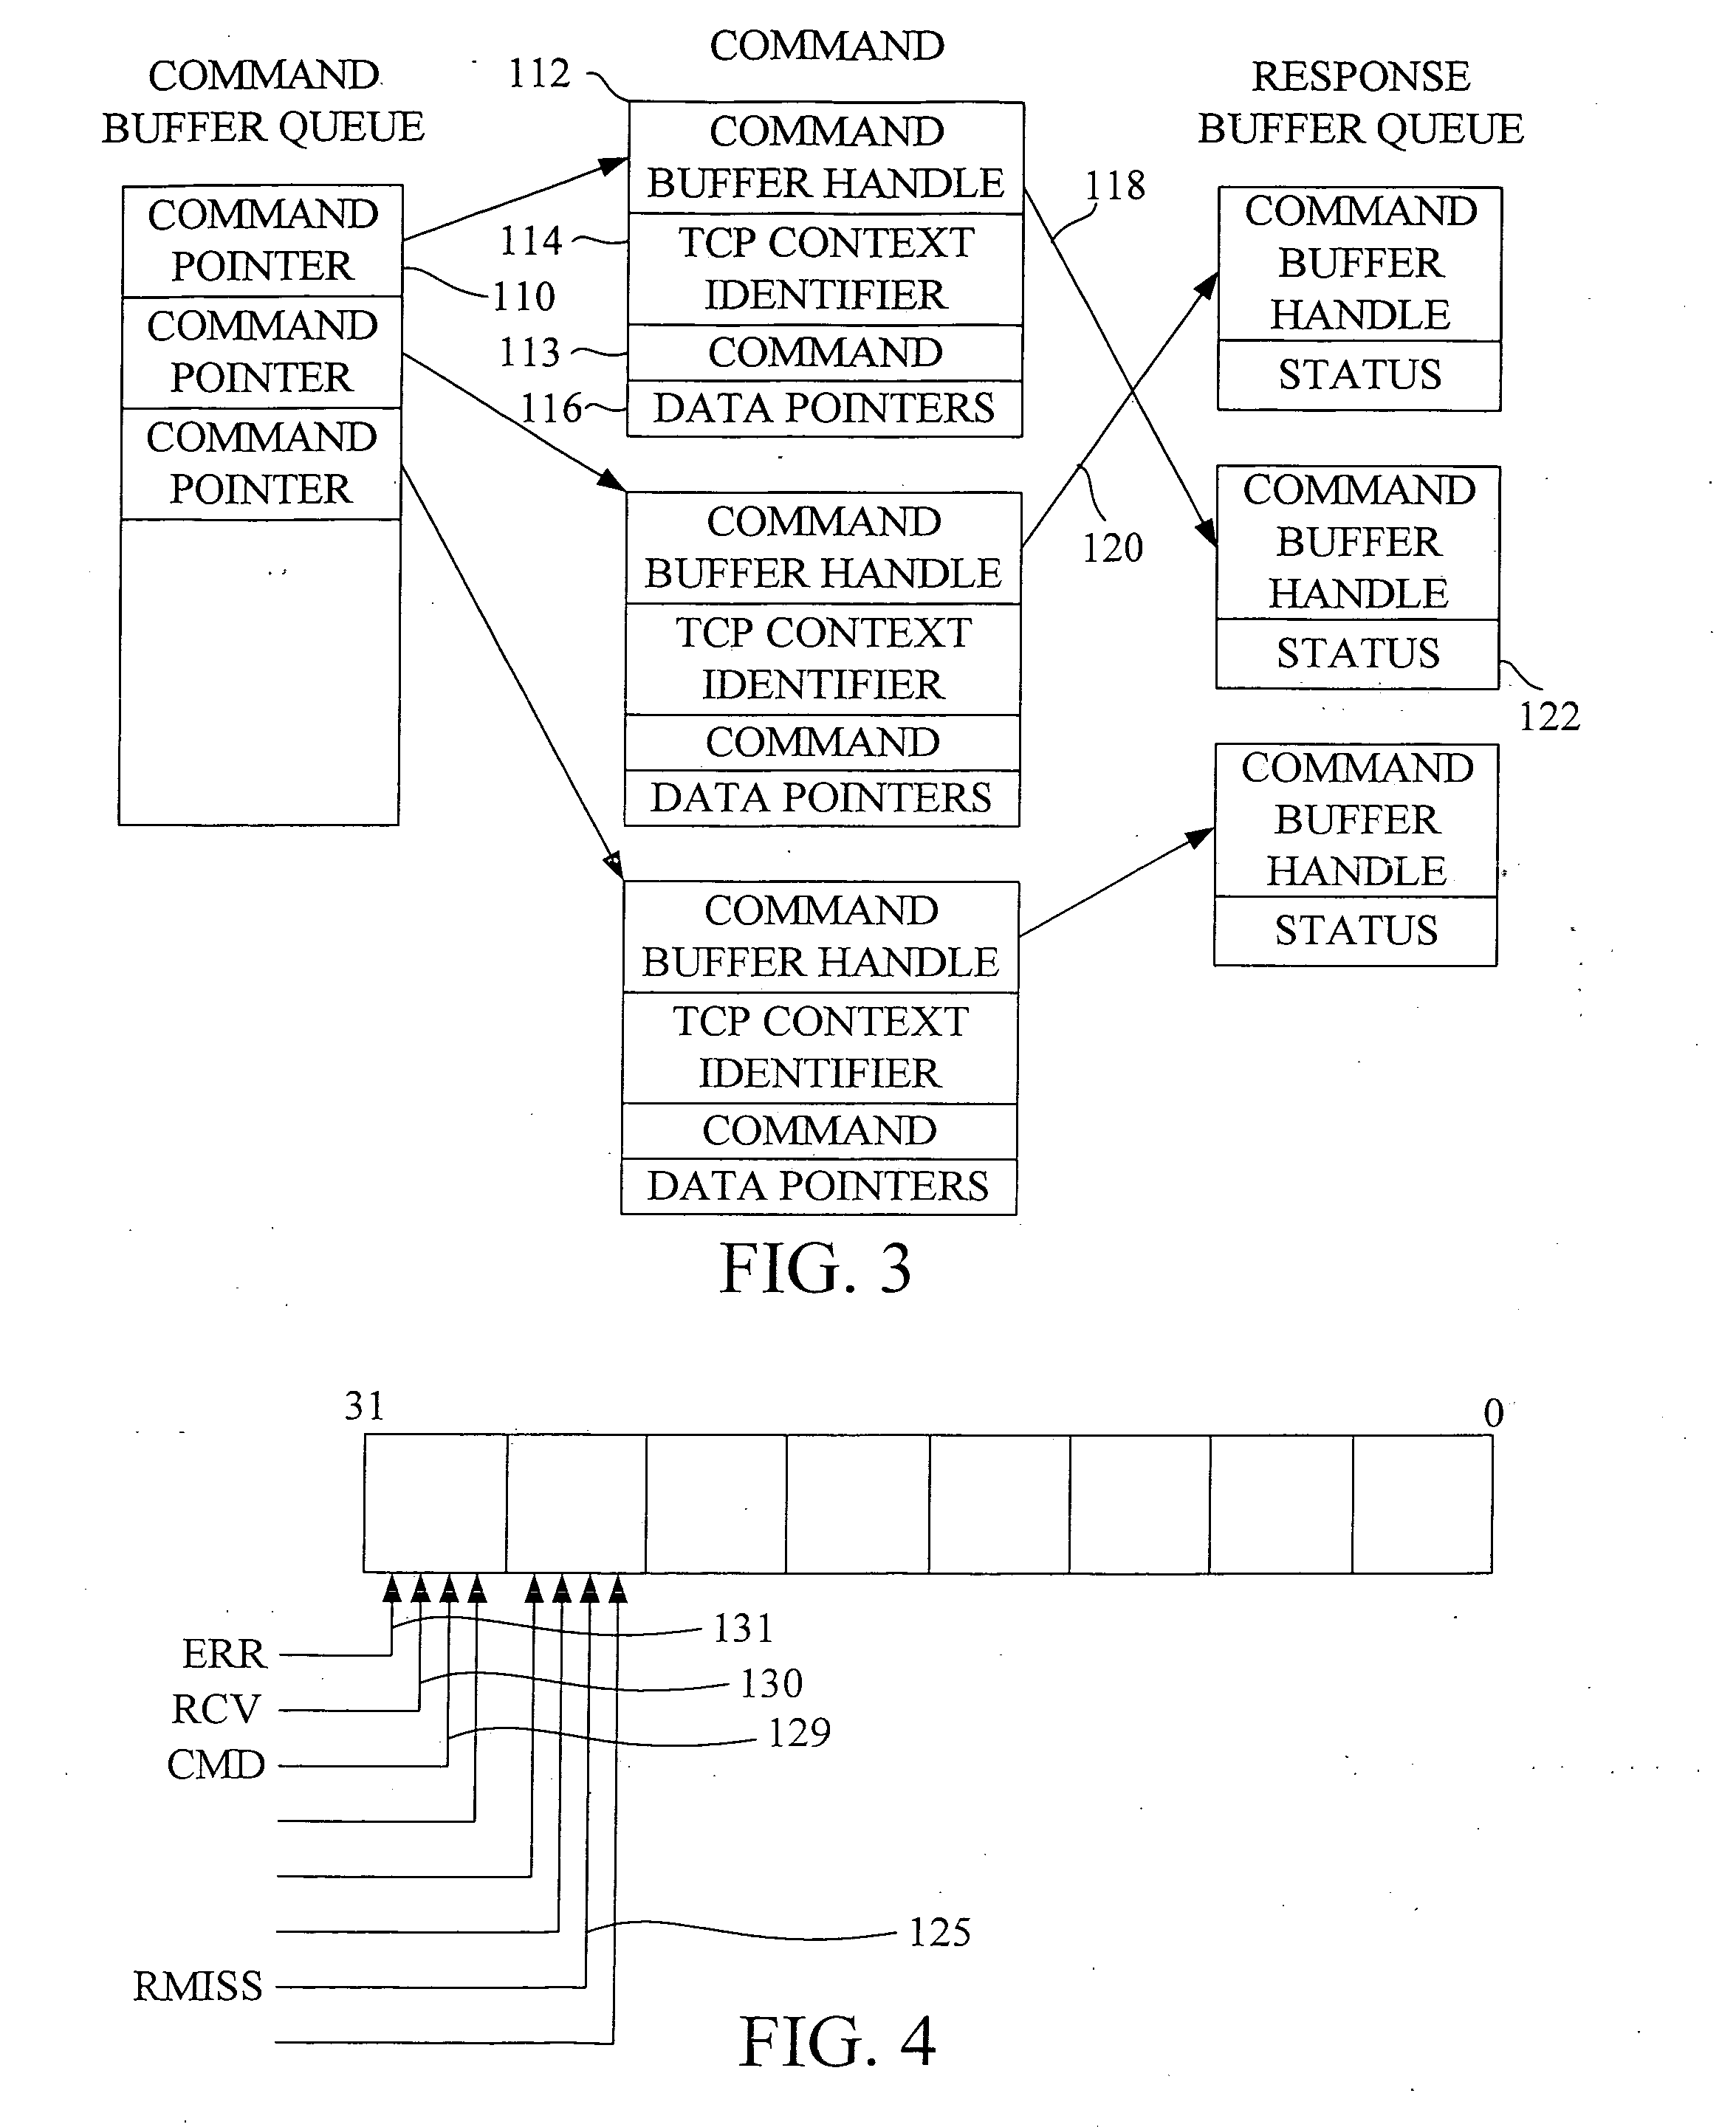 Network interface device that can transfer control of a TCP connection to a host CPU